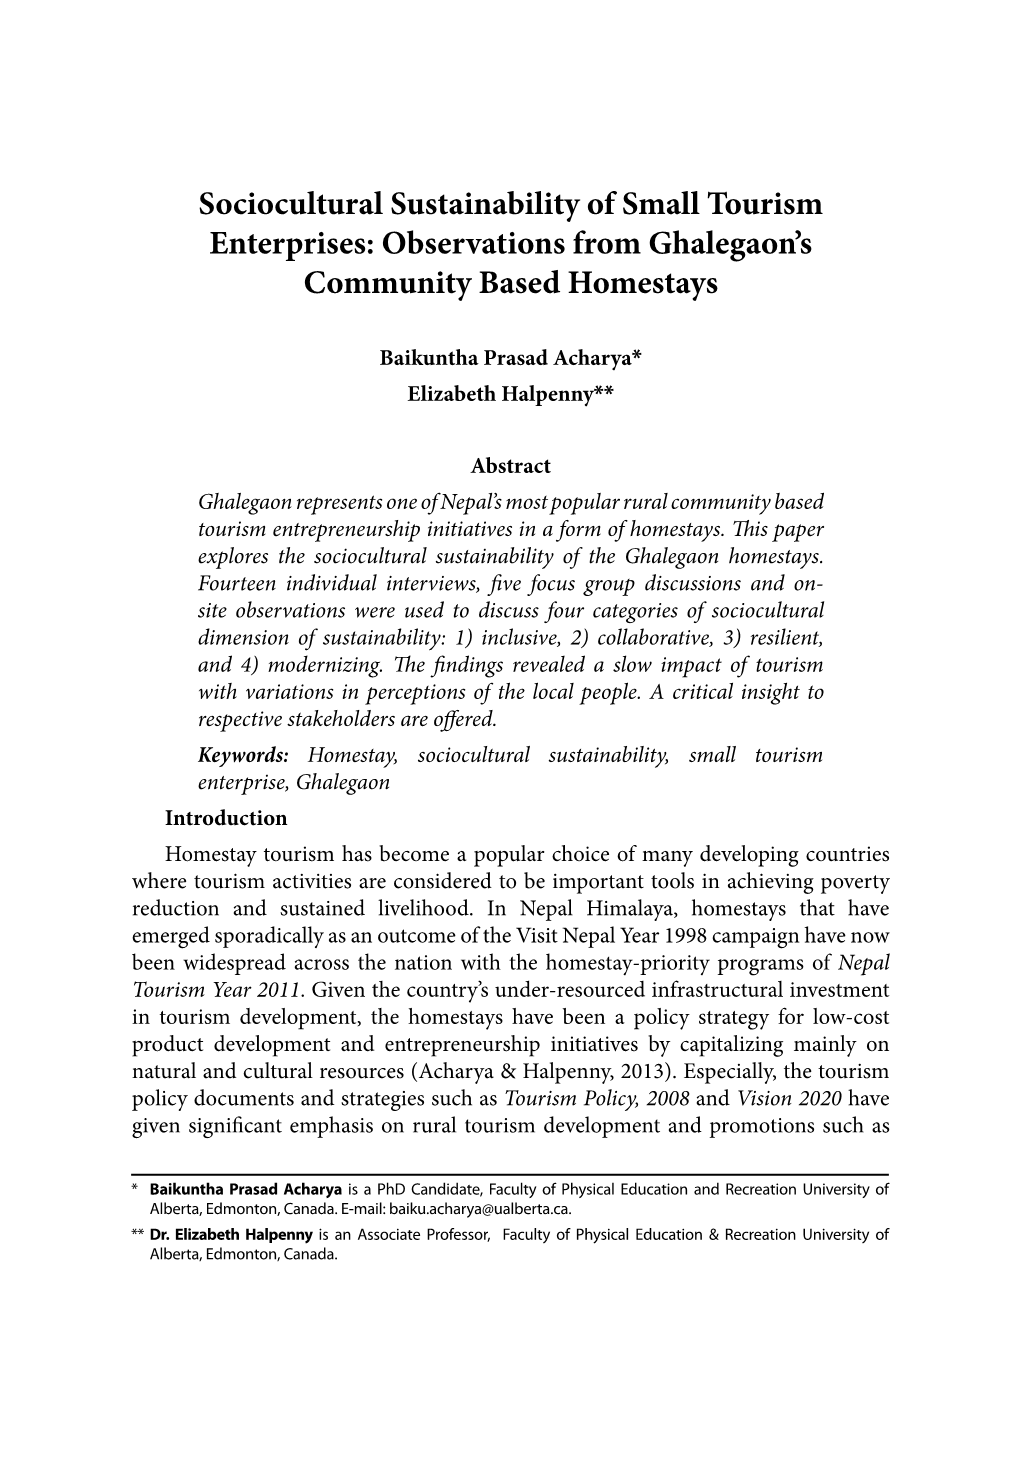 Sociocultural Sustainability of Small Tourism Enterprises: Observations from Ghalegaon’S Community Based Homestays